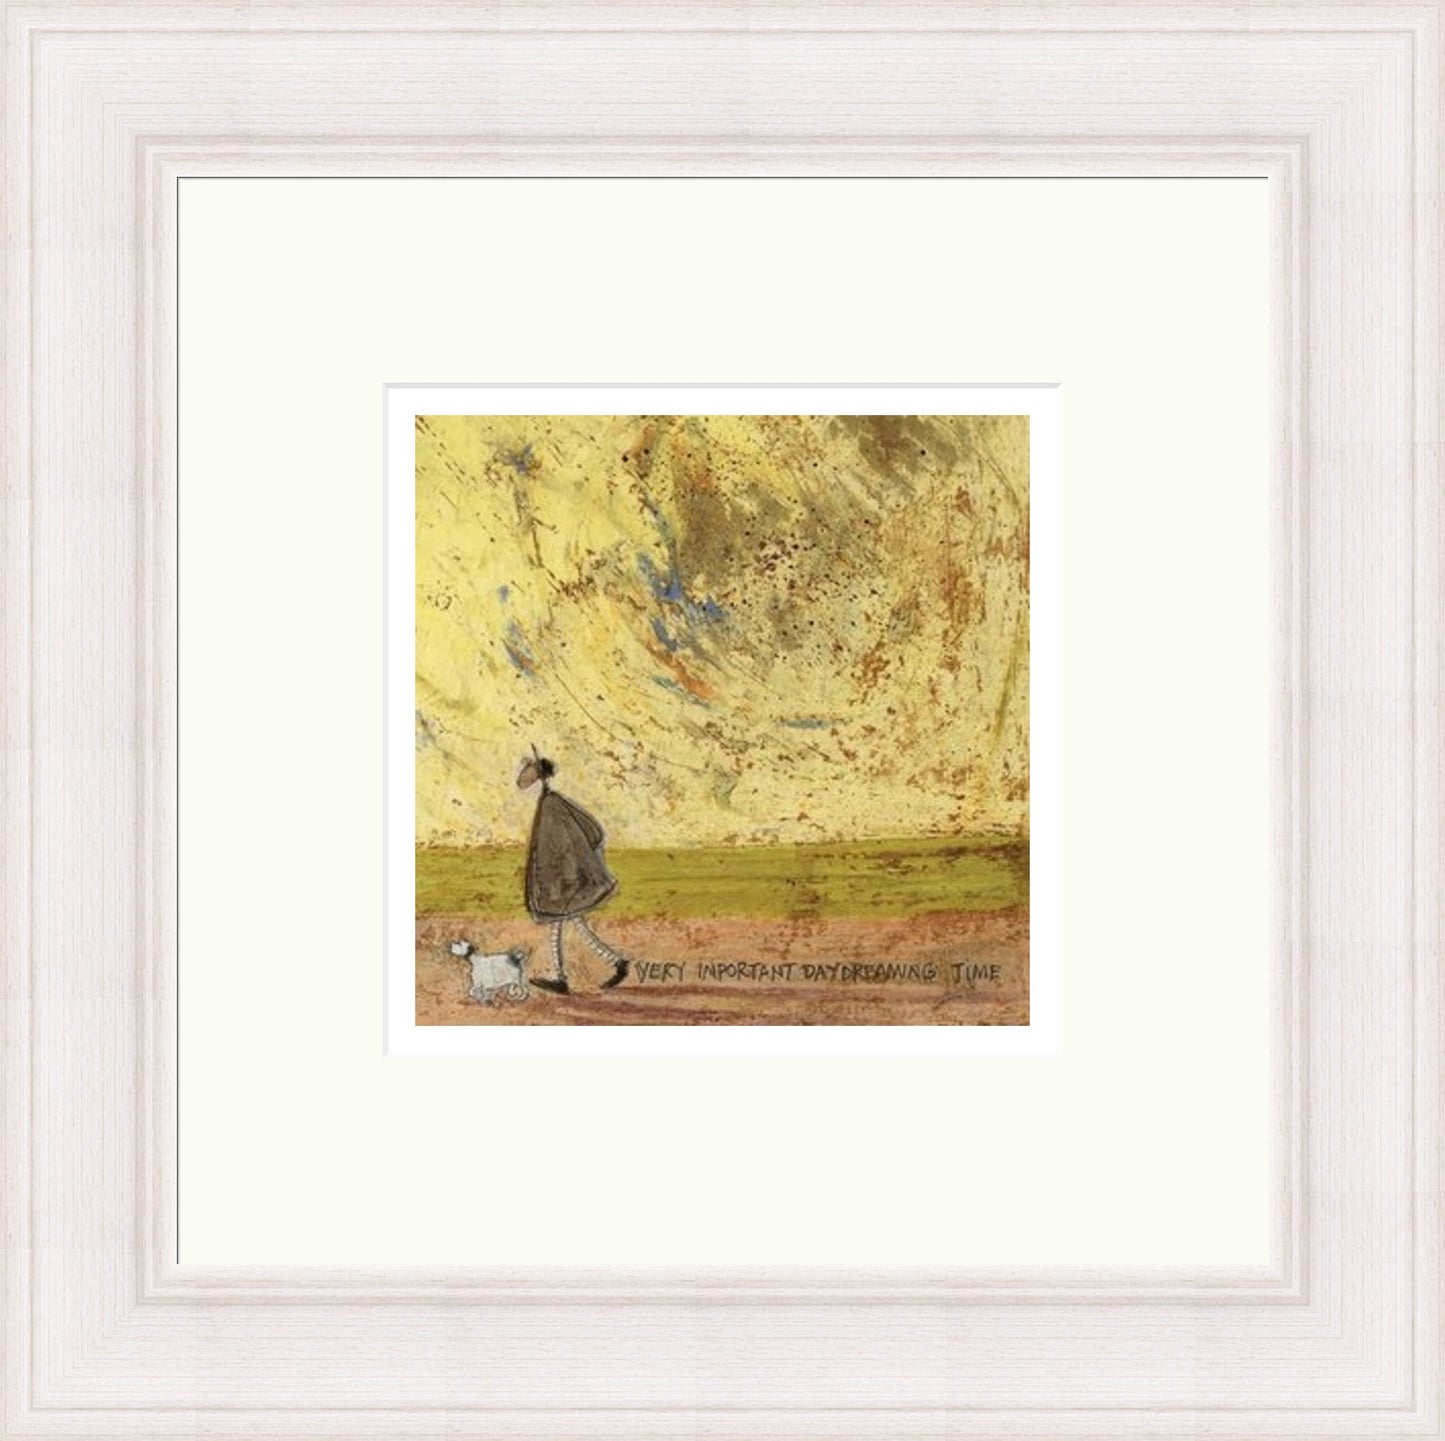 Very Important Daydreaming Time by Sam Toft